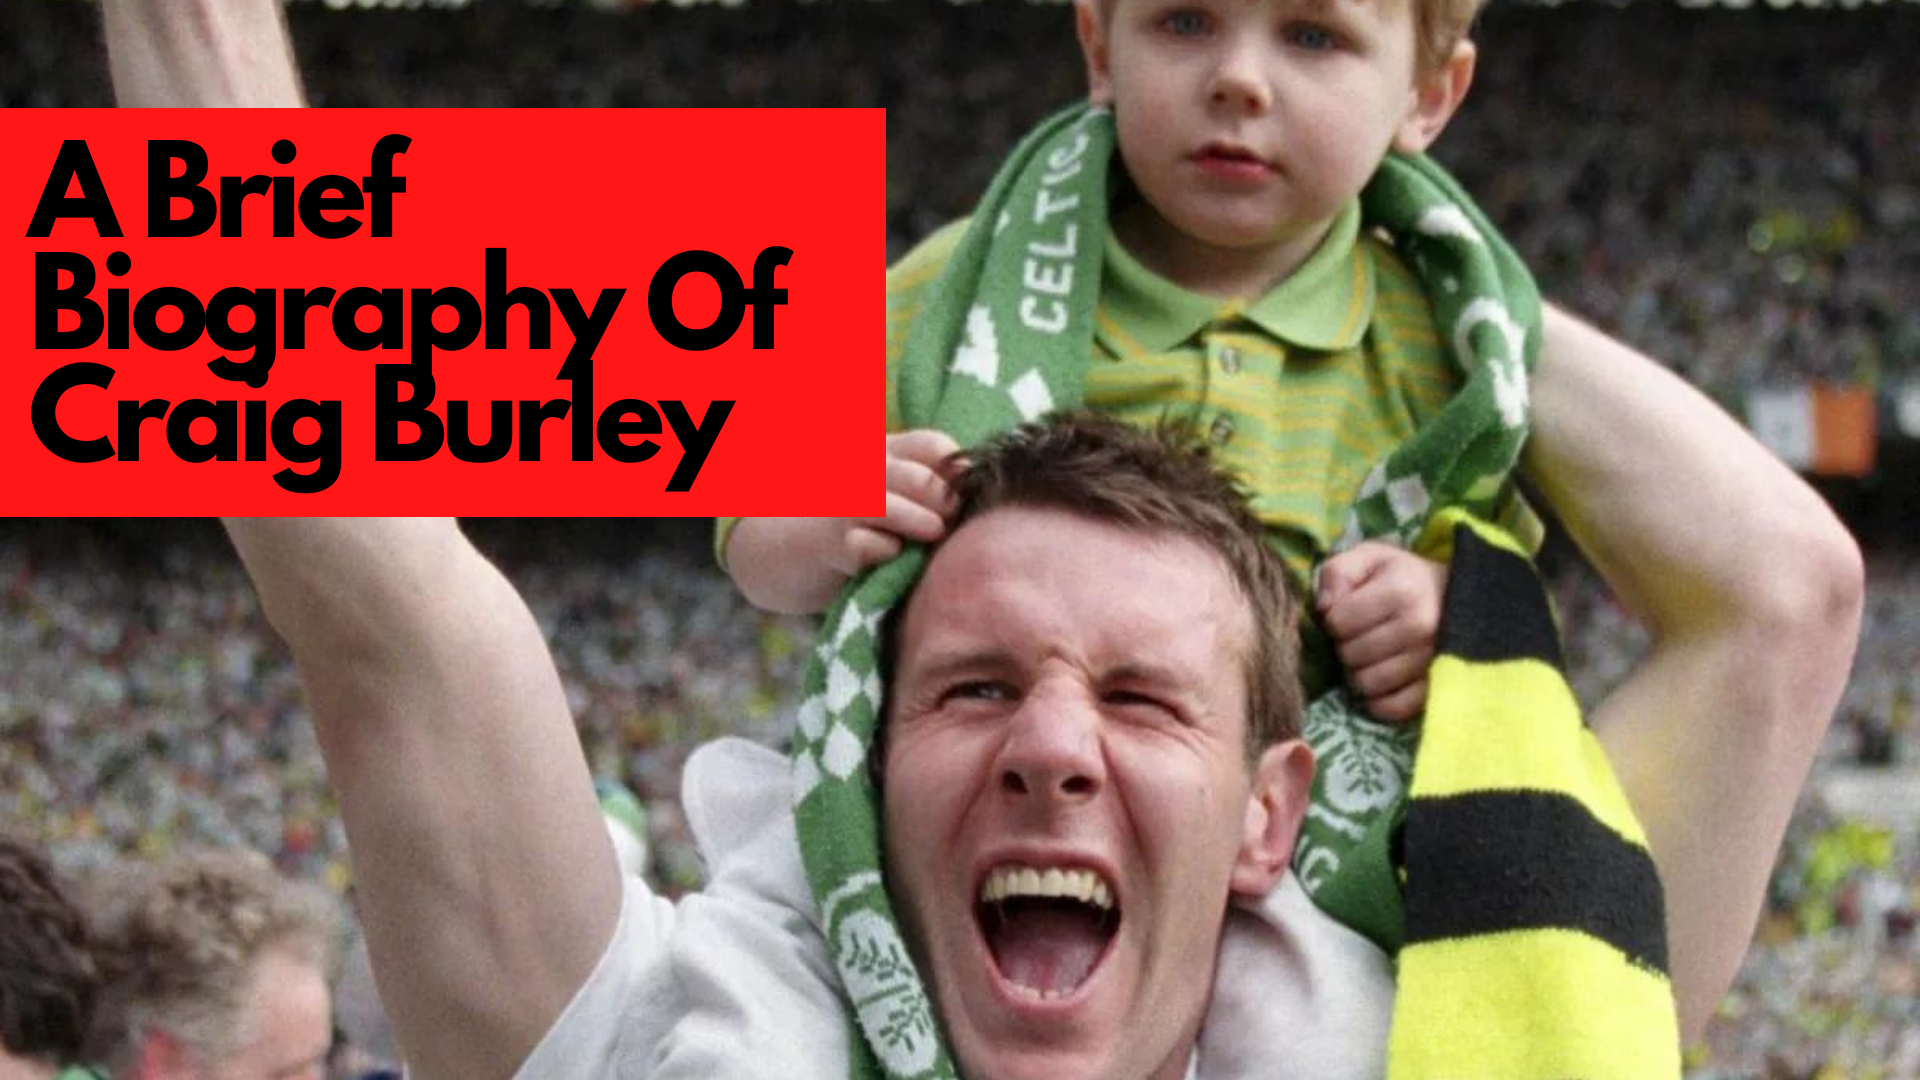 Craig Burley carrying his son on his back while shouting